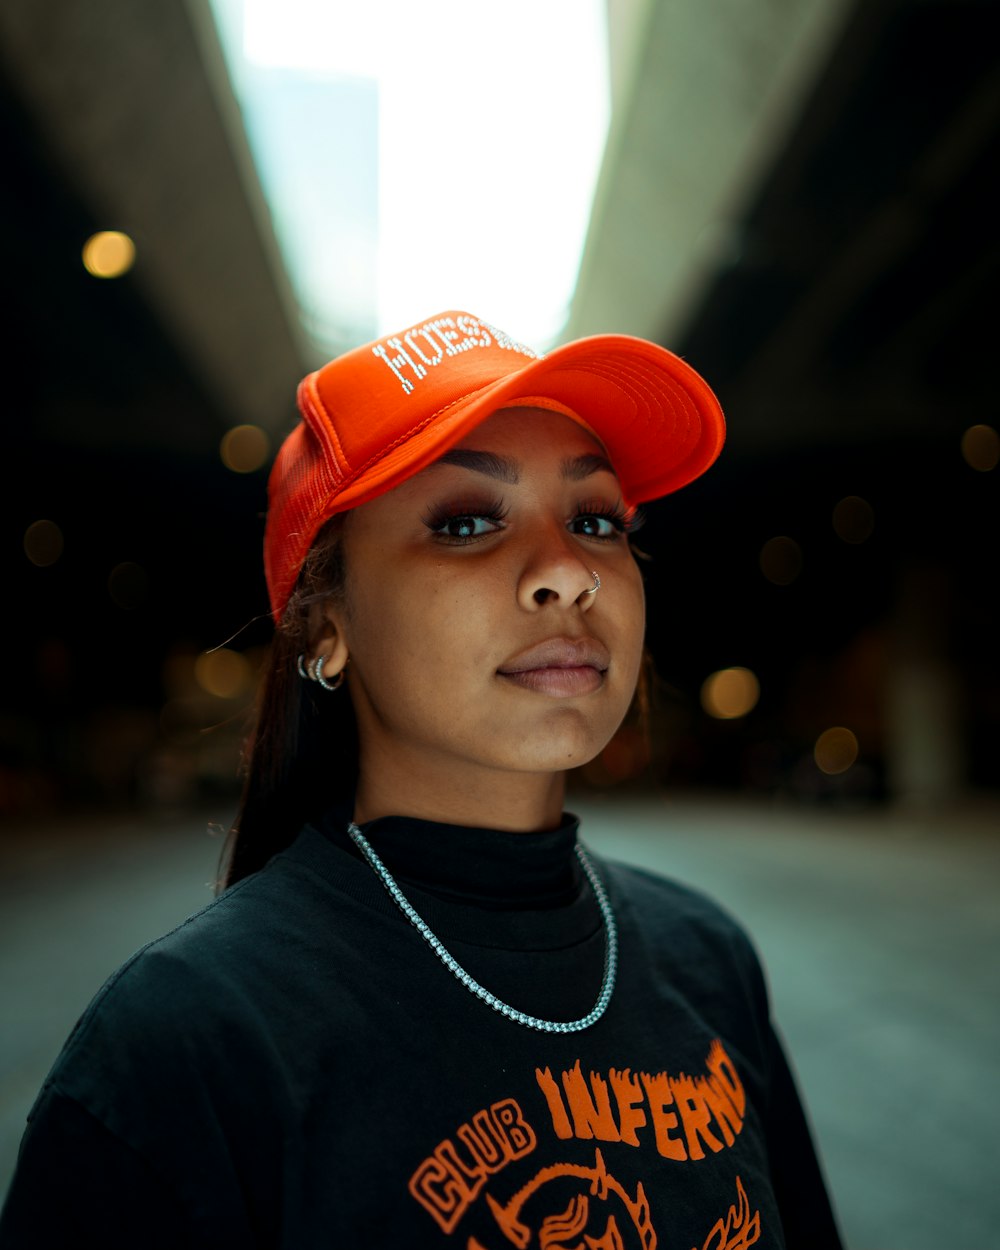 a woman wearing an orange hat and a black shirt